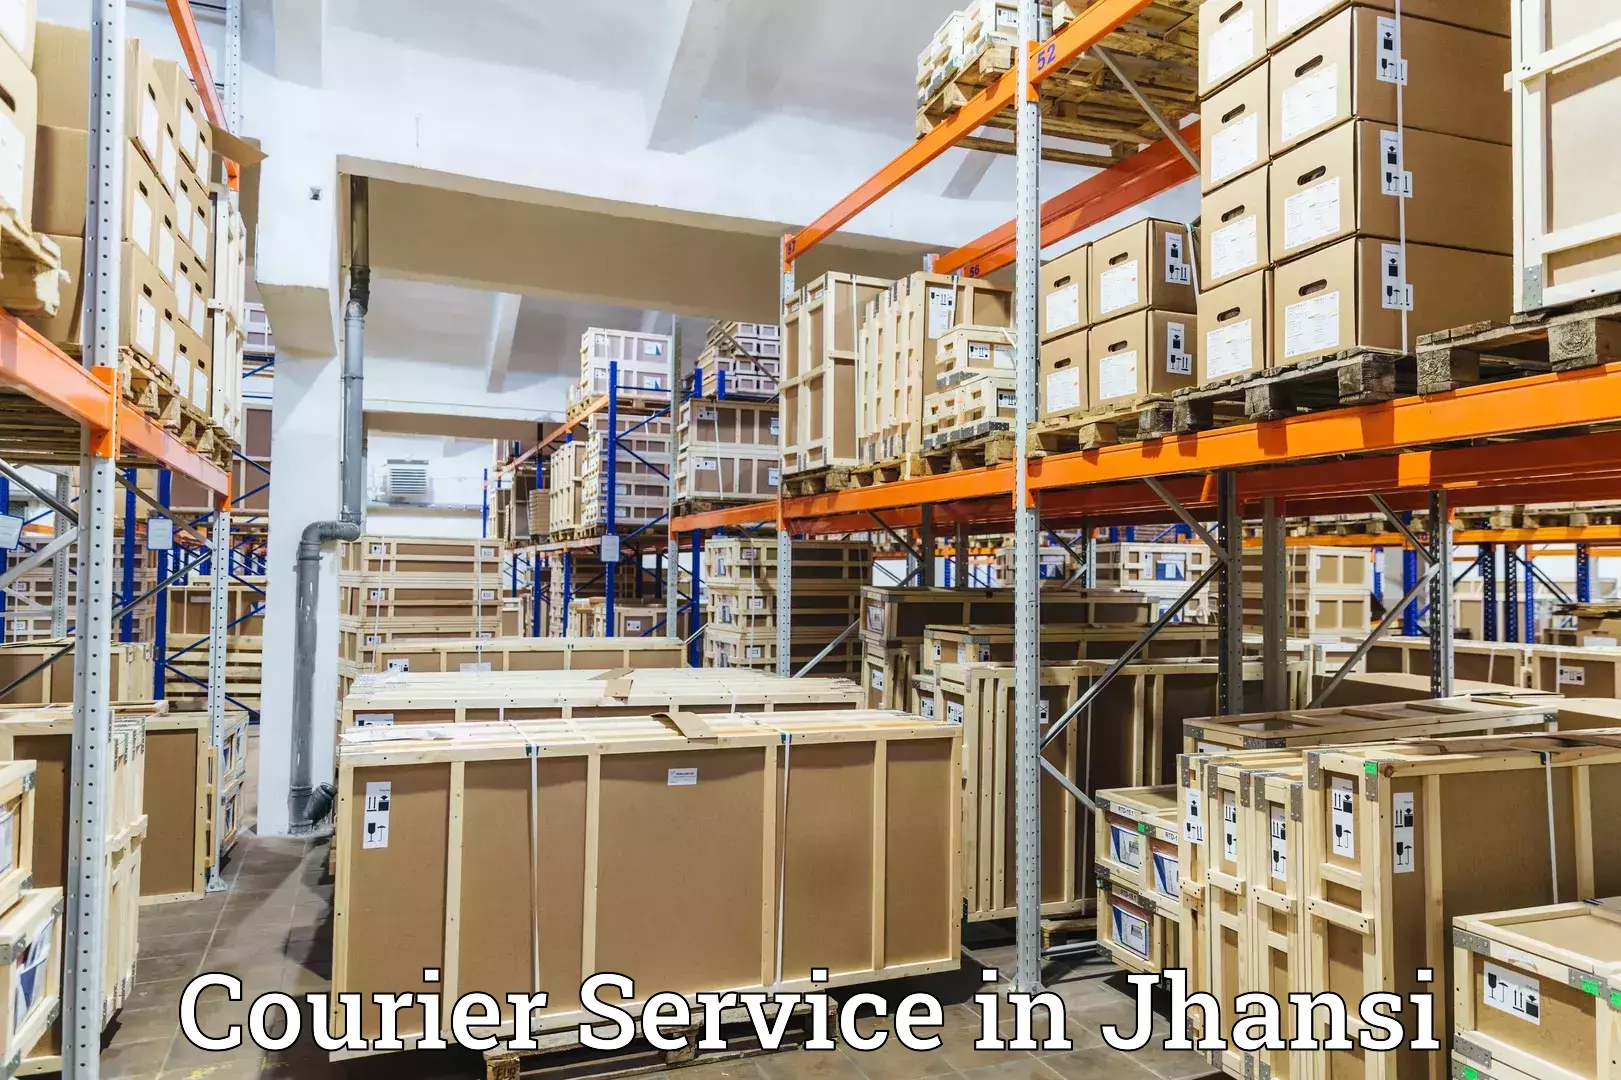 Parcel service for businesses in Jhansi